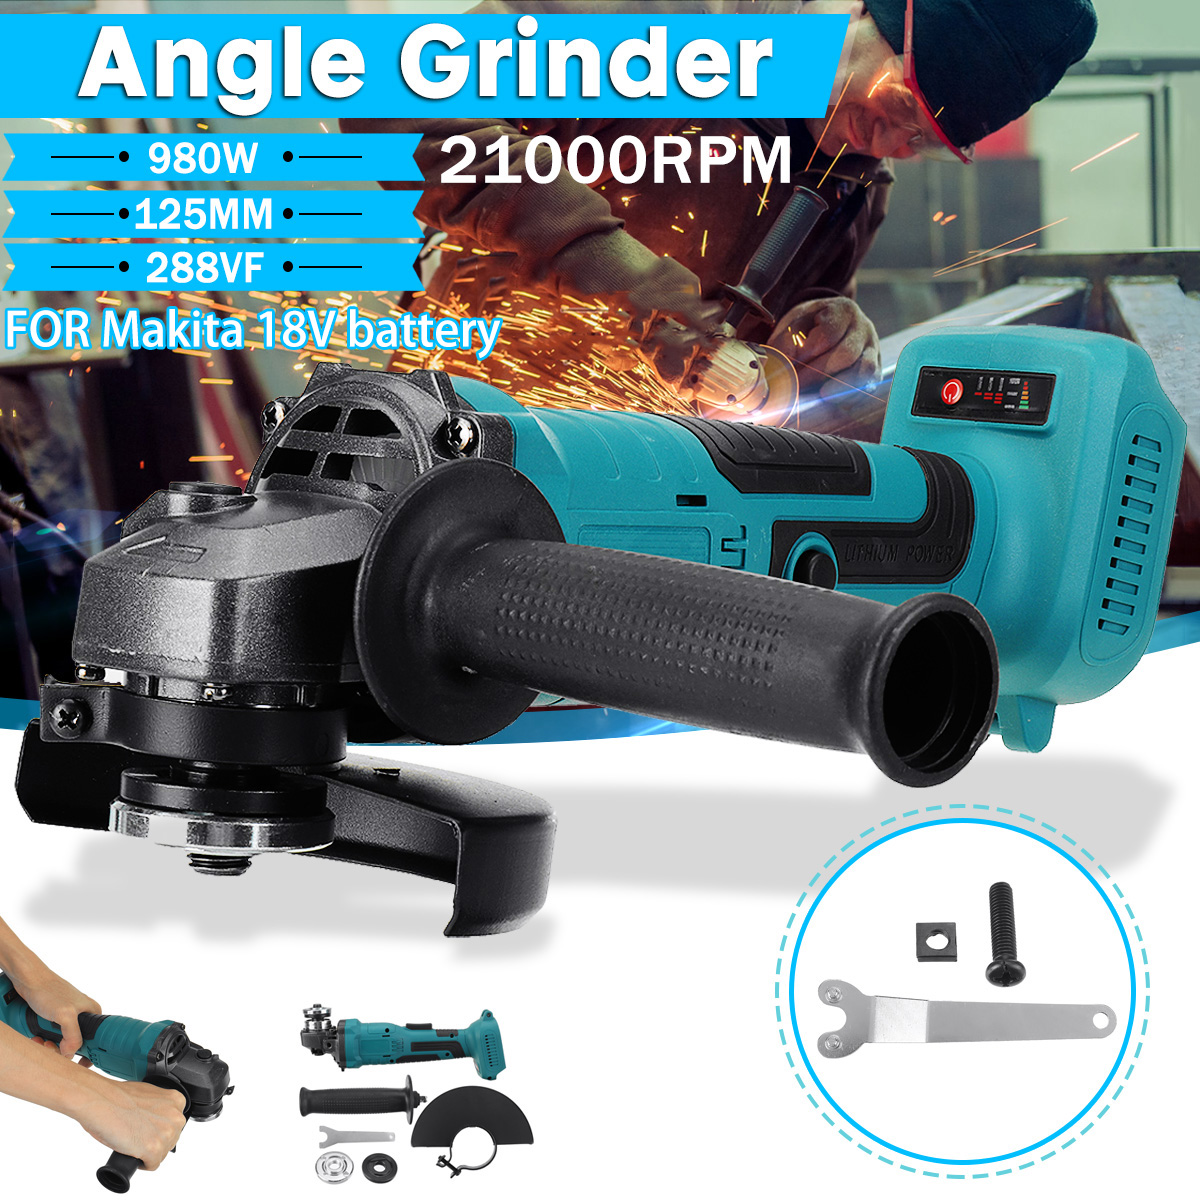 100125mm-Brushless-Cordless-Angle-Grinder-Polisher-Cutting-Tool-W-None12-Battery-For-Makita-1867833-1